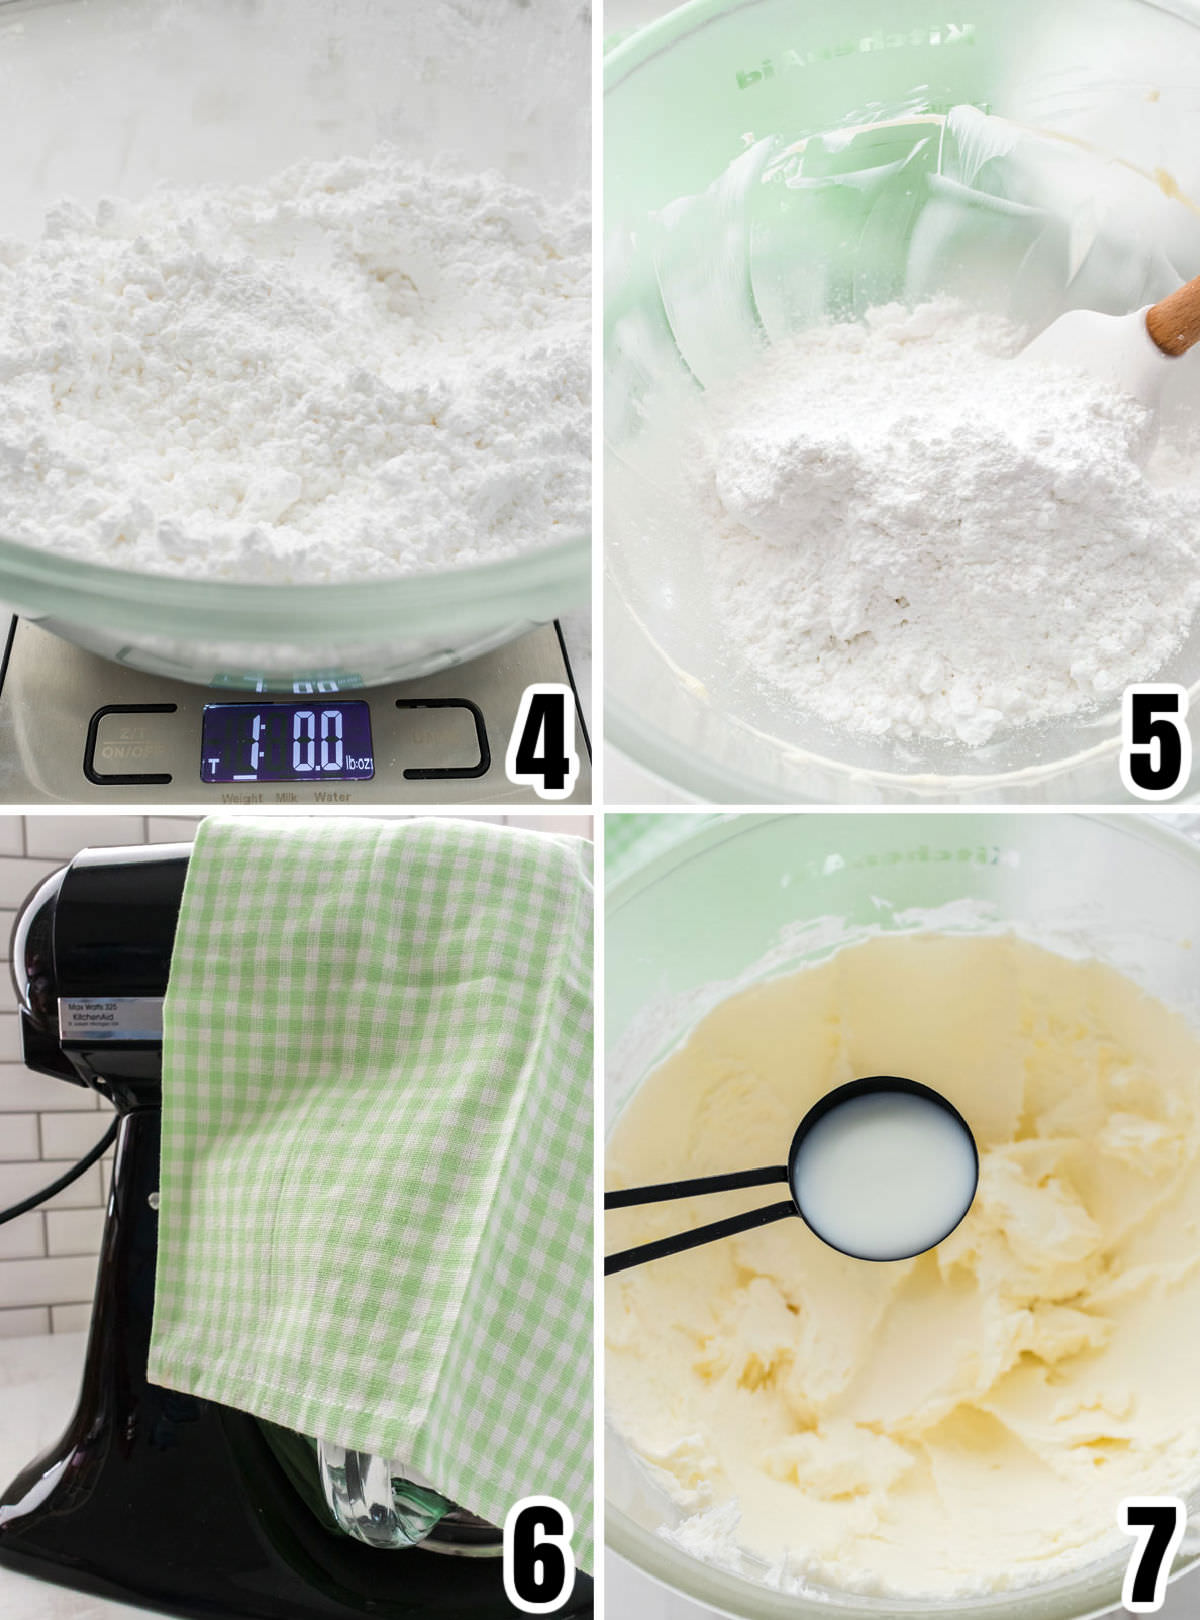 Collage image showing the steps for adding the powdered sugar to the Mint Chip Buttercream Frosting.